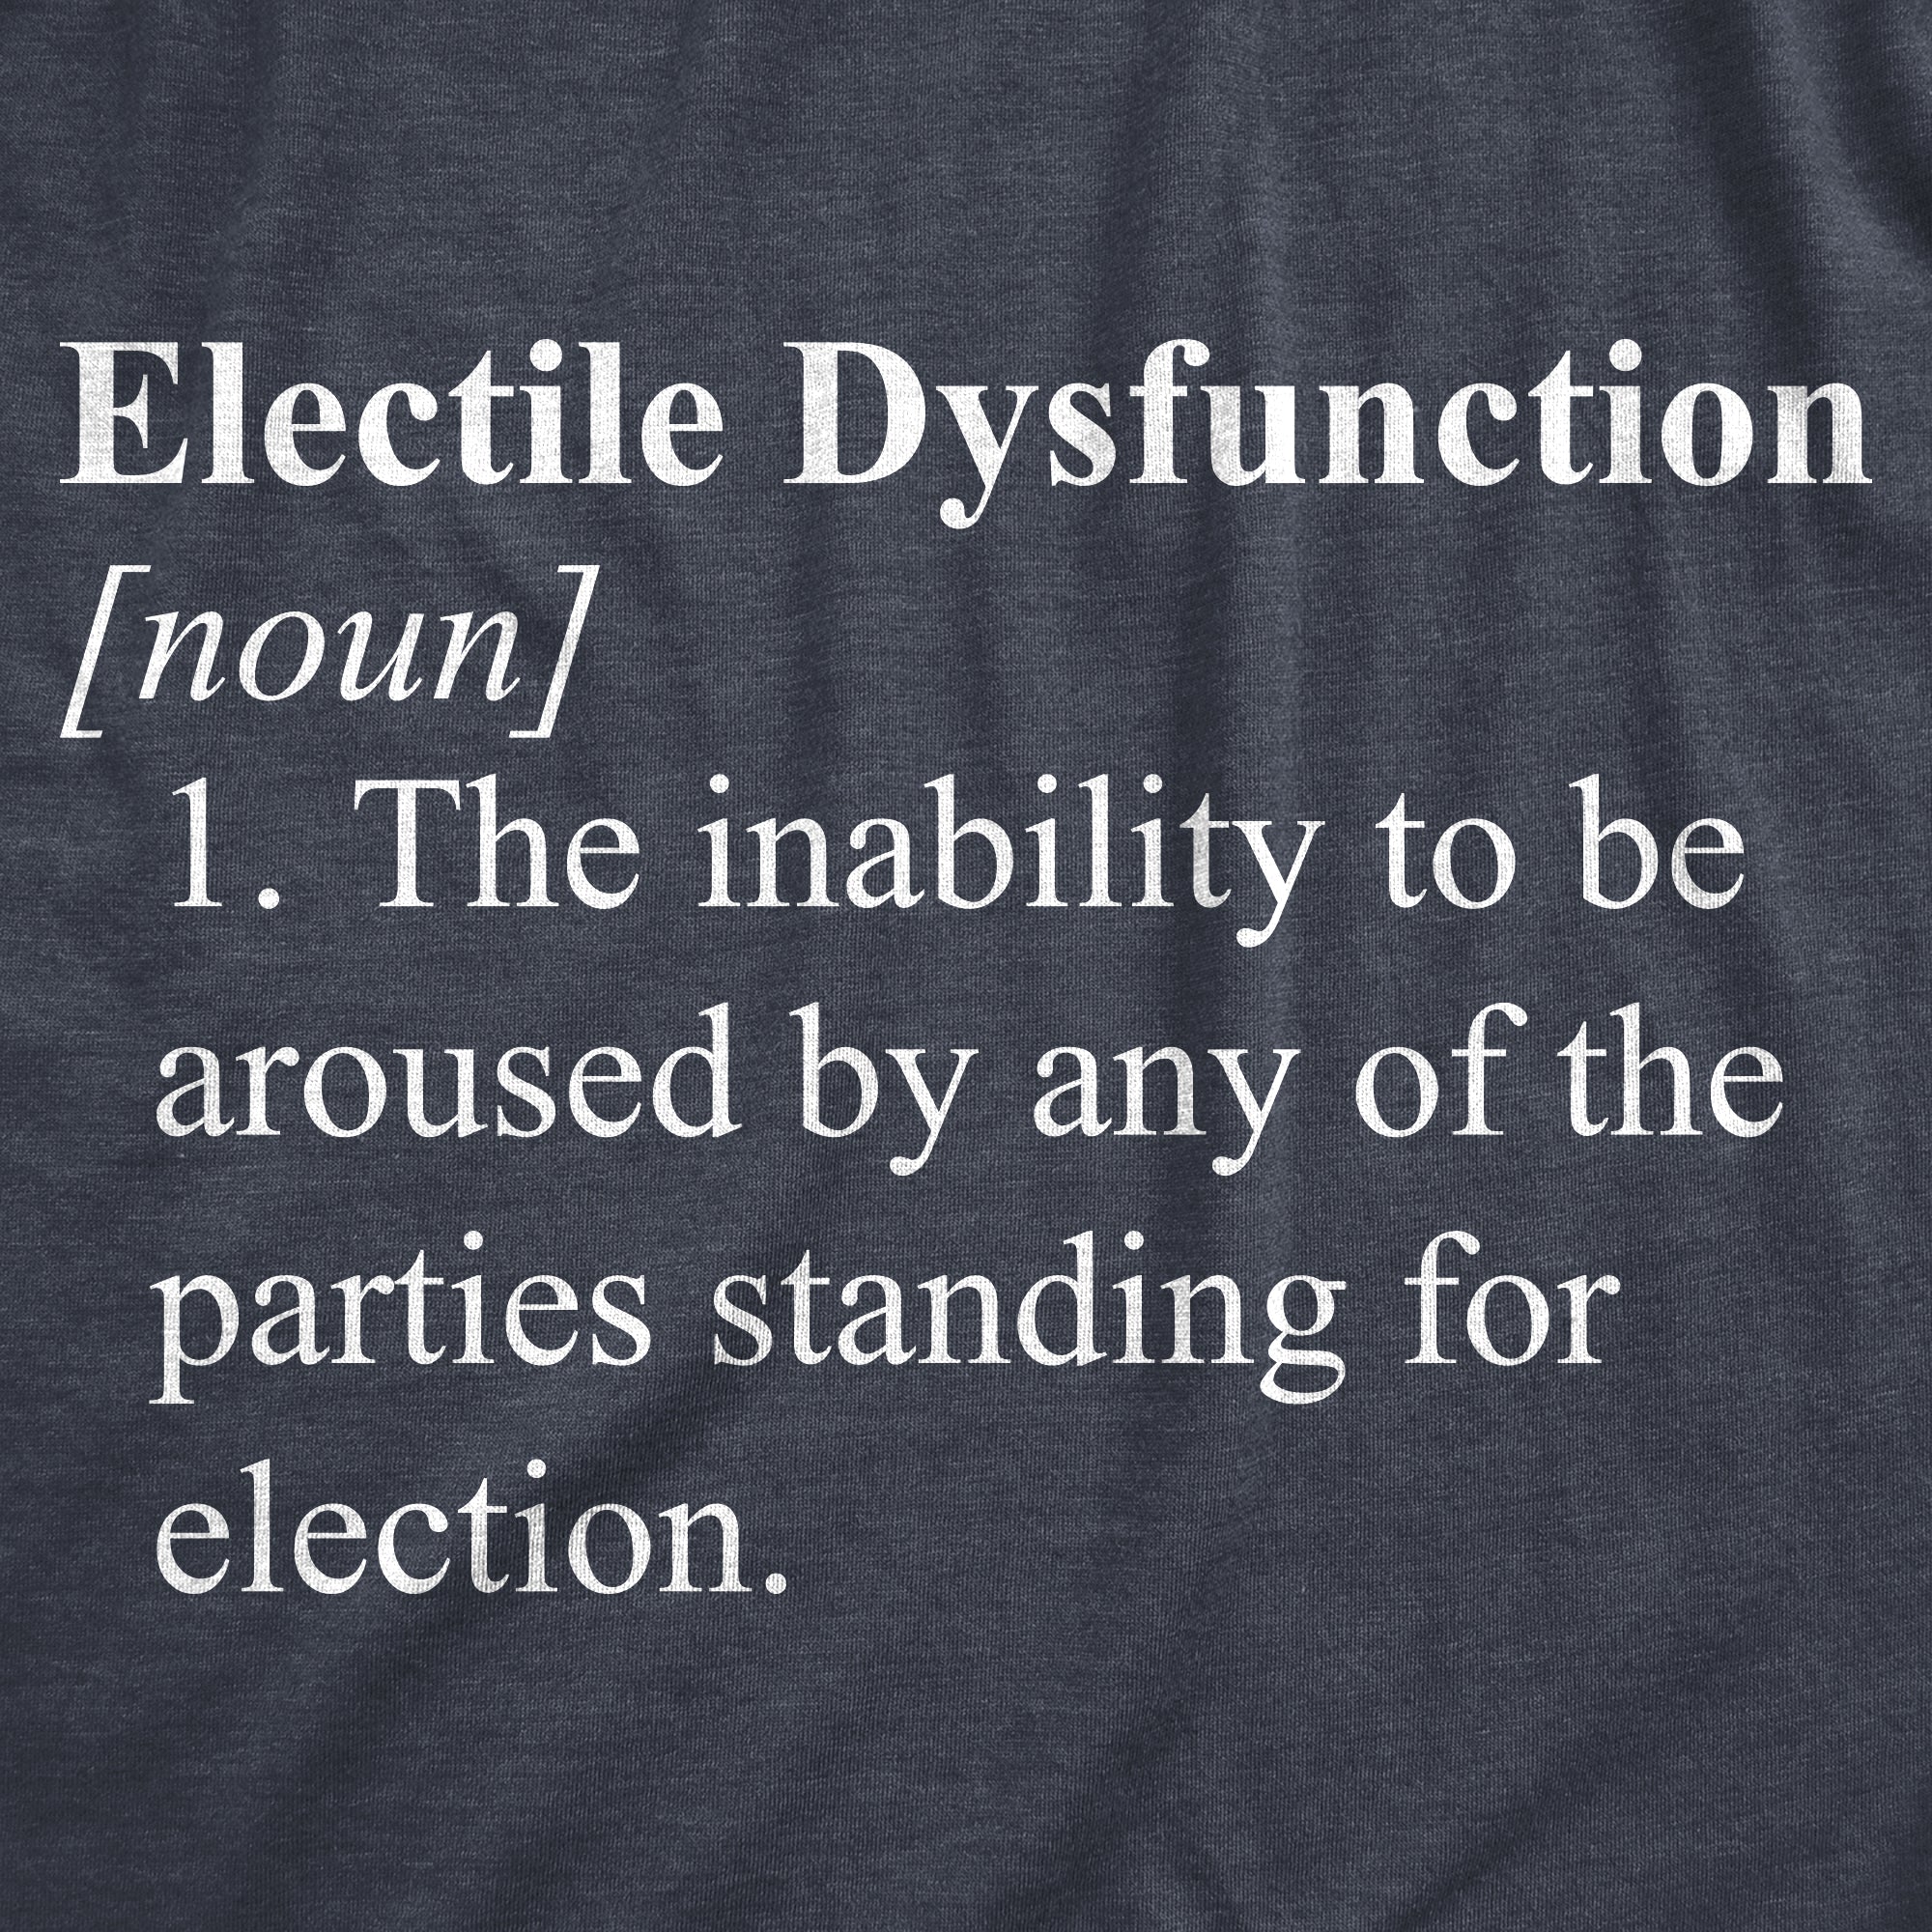 Funny Heather Navy - ELECTILE Electile Dysfunction Mens T Shirt Nerdy Political sarcastic Tee